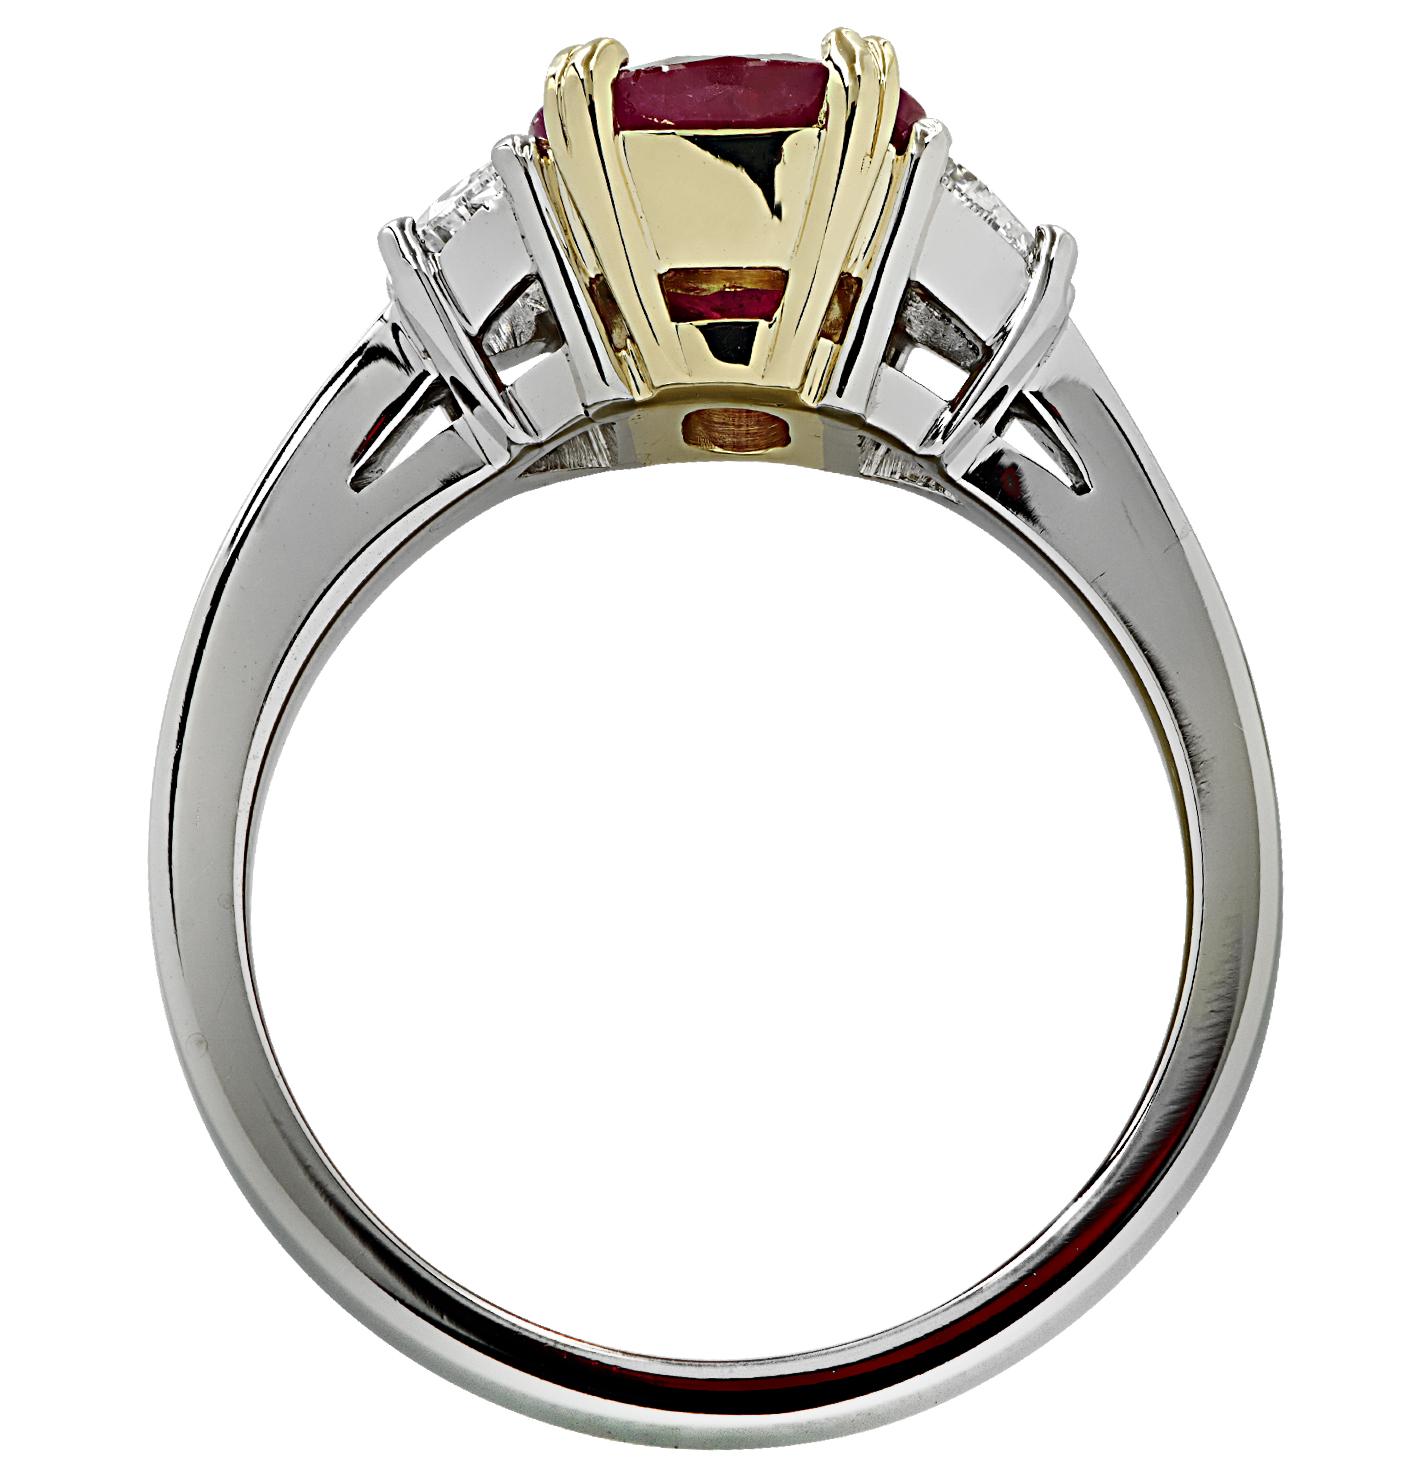 Stunning three stone ring crafted in Platinum and 18 karat yellow gold, featuring a stunning deep red oval ruby weighing approximately 1.8 carats, flanked by two half moon diamonds weighing approximately 0.50 carats total, G color, VS clarity. This